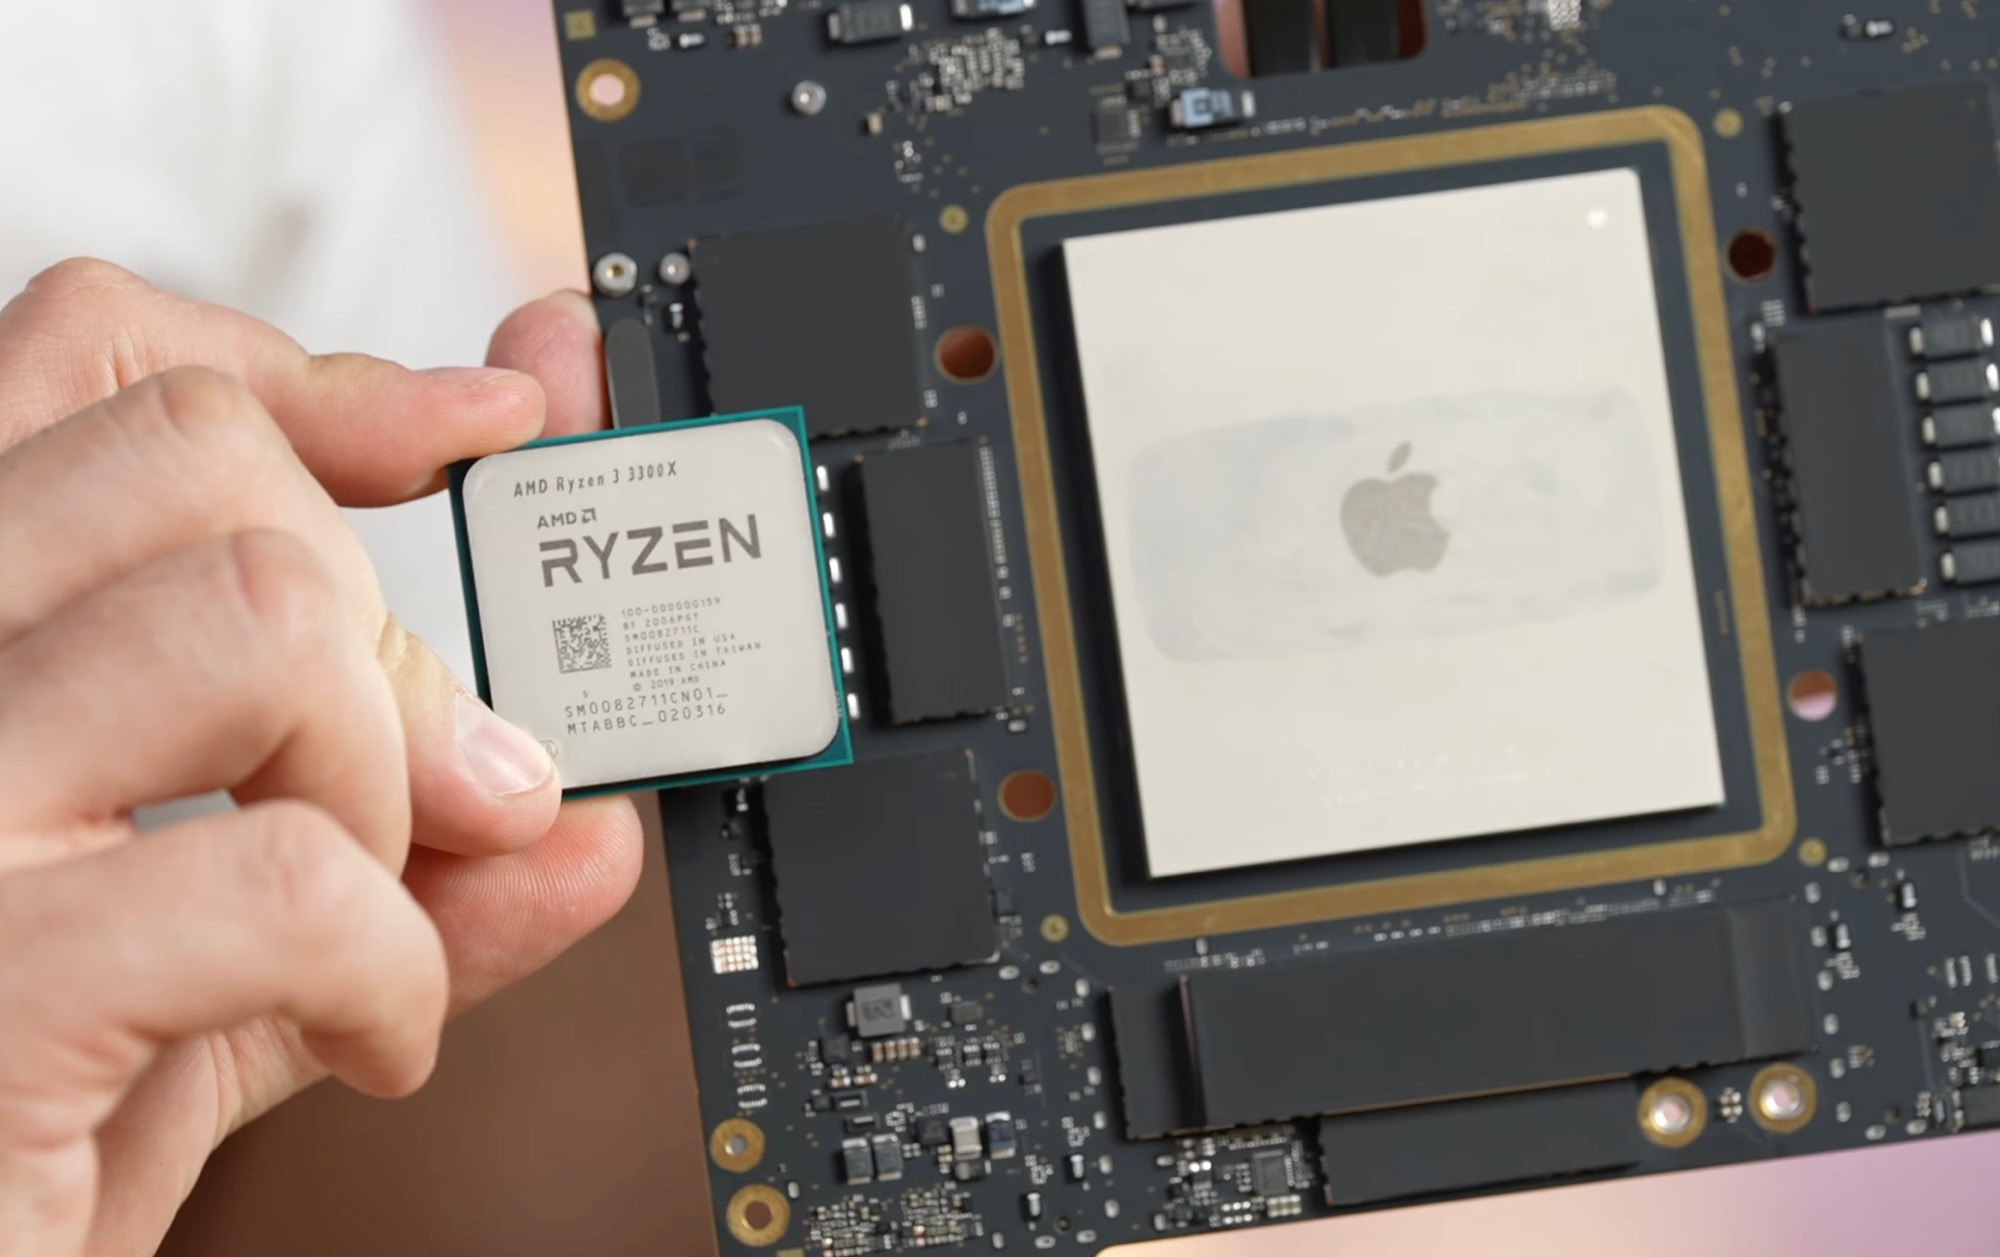 Apple Mac Studio teardown details upgradeable memory and the sheer size of the M1 Ultra SoC